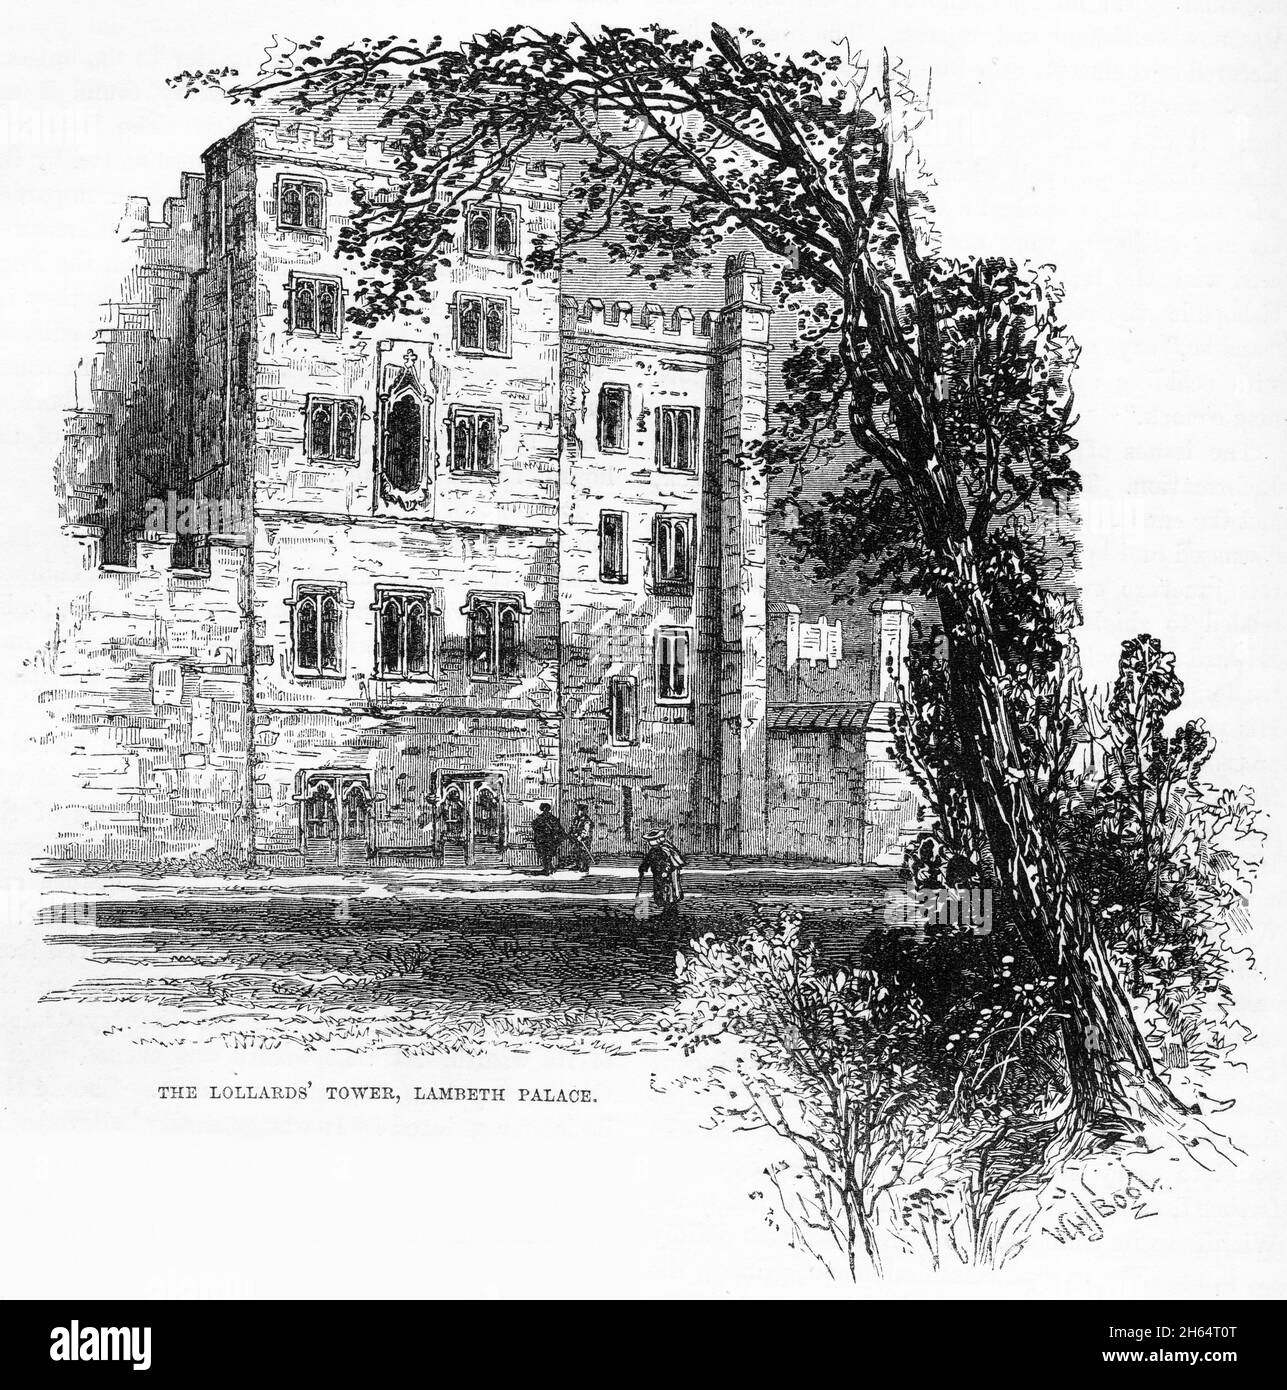 Engraving of Lollard's Tower at Lambeth Palace, England, circa 1400. Illustration from 'The history of Protestantism' by James Aitken Wylie (1808-1890), pub. 1878 Stock Photo